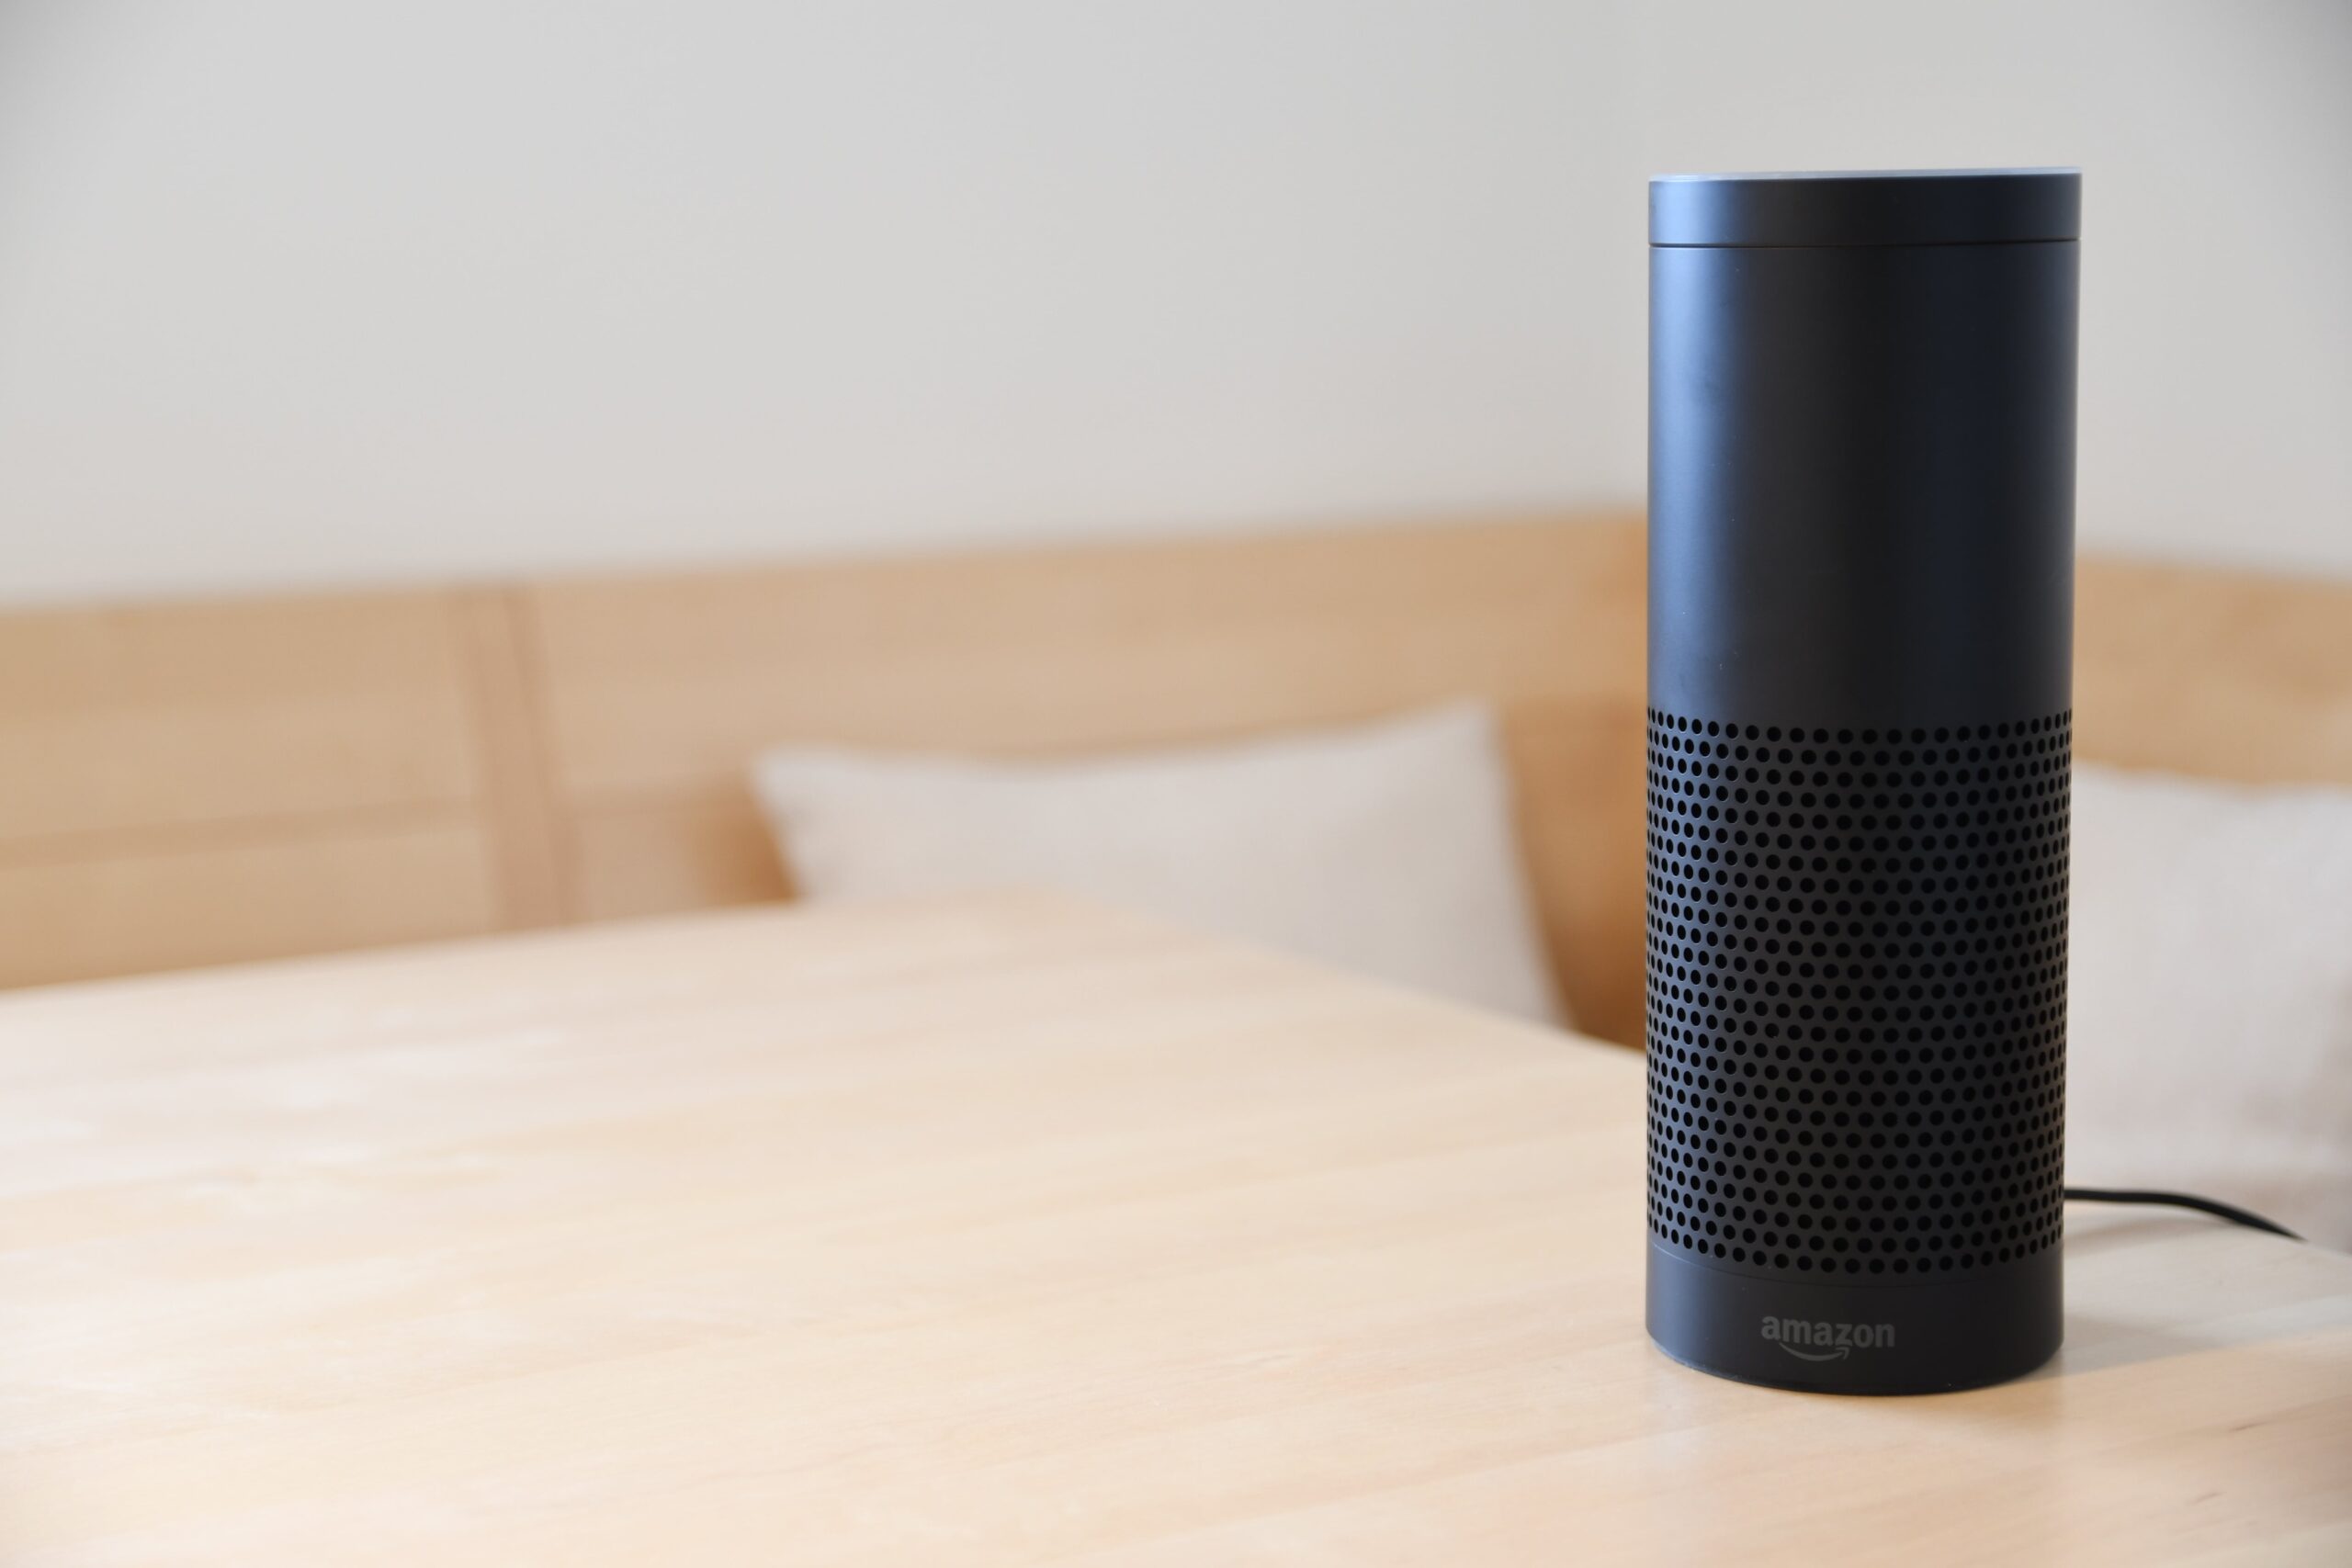 an amazon echo device on a wood surface.